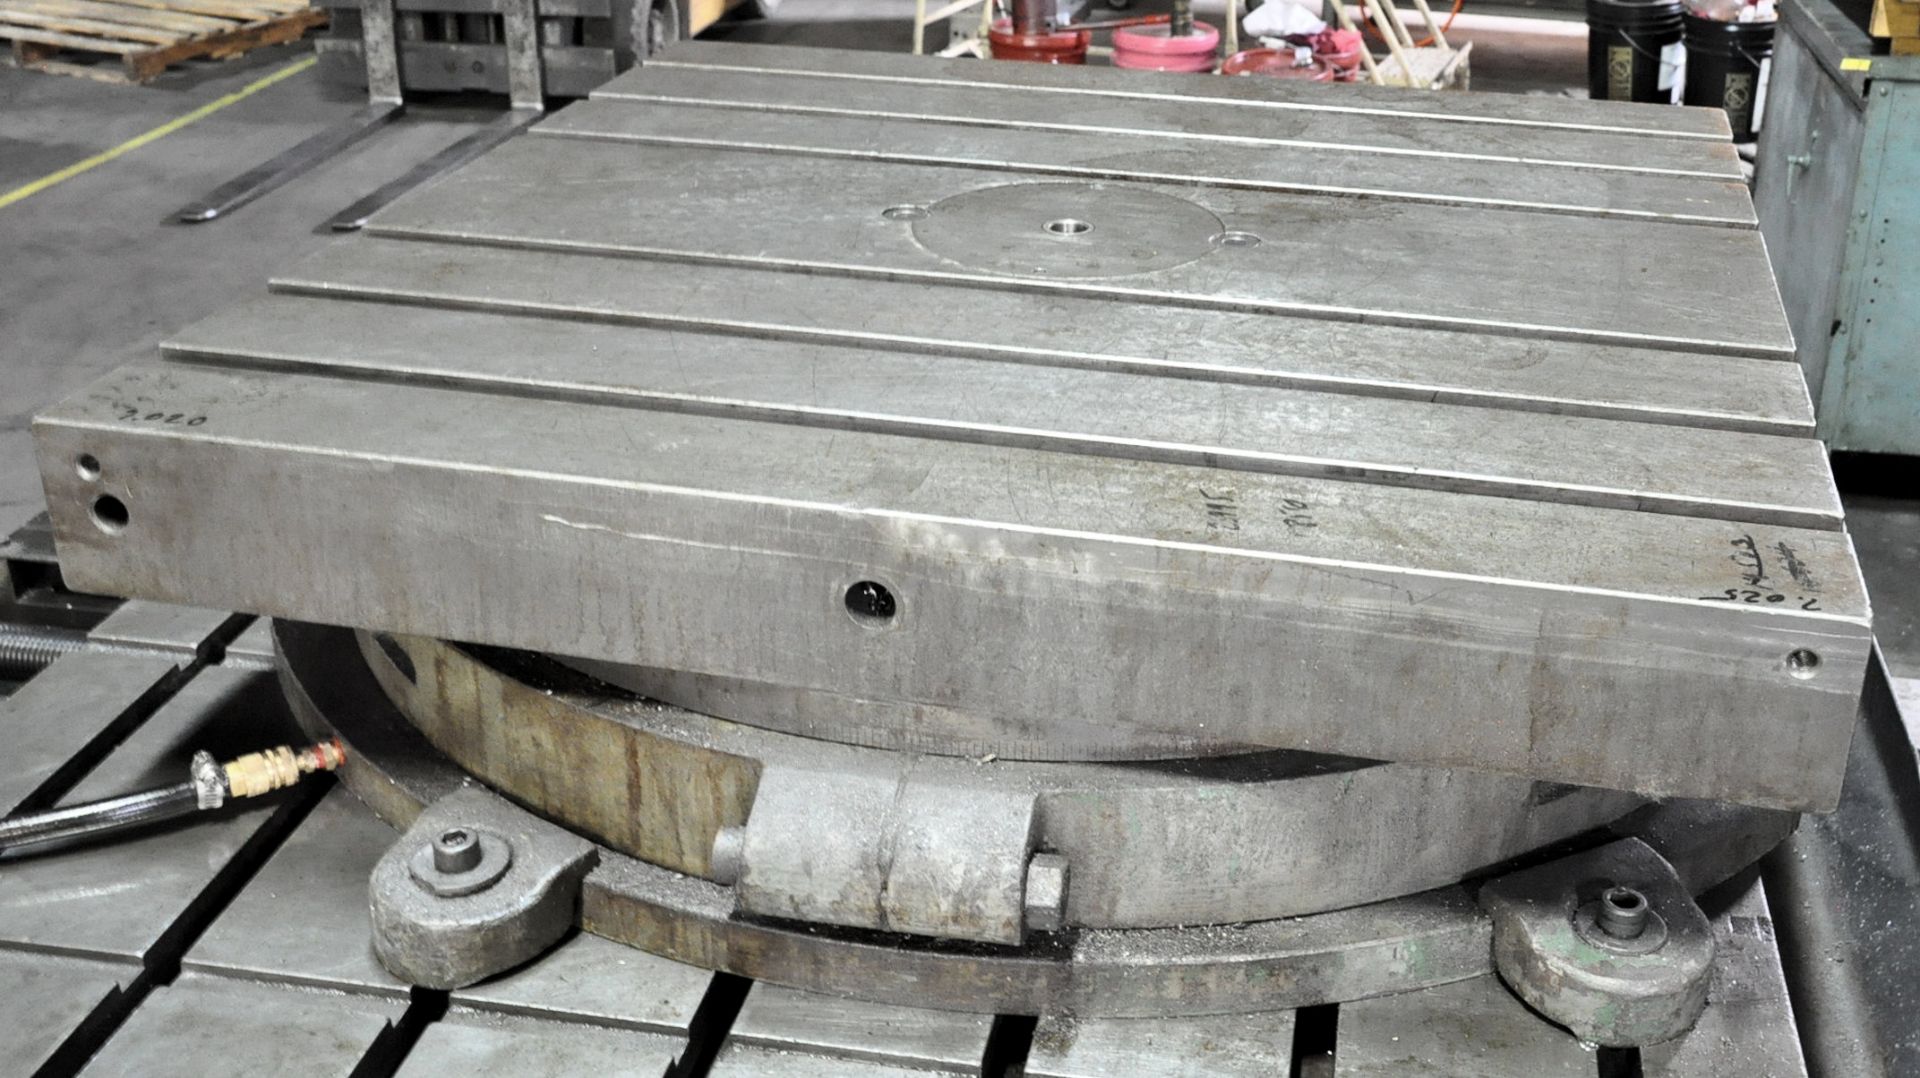 36" x 36" T-Slotted Air Lift Rotary Table - Bild 2 aus 2